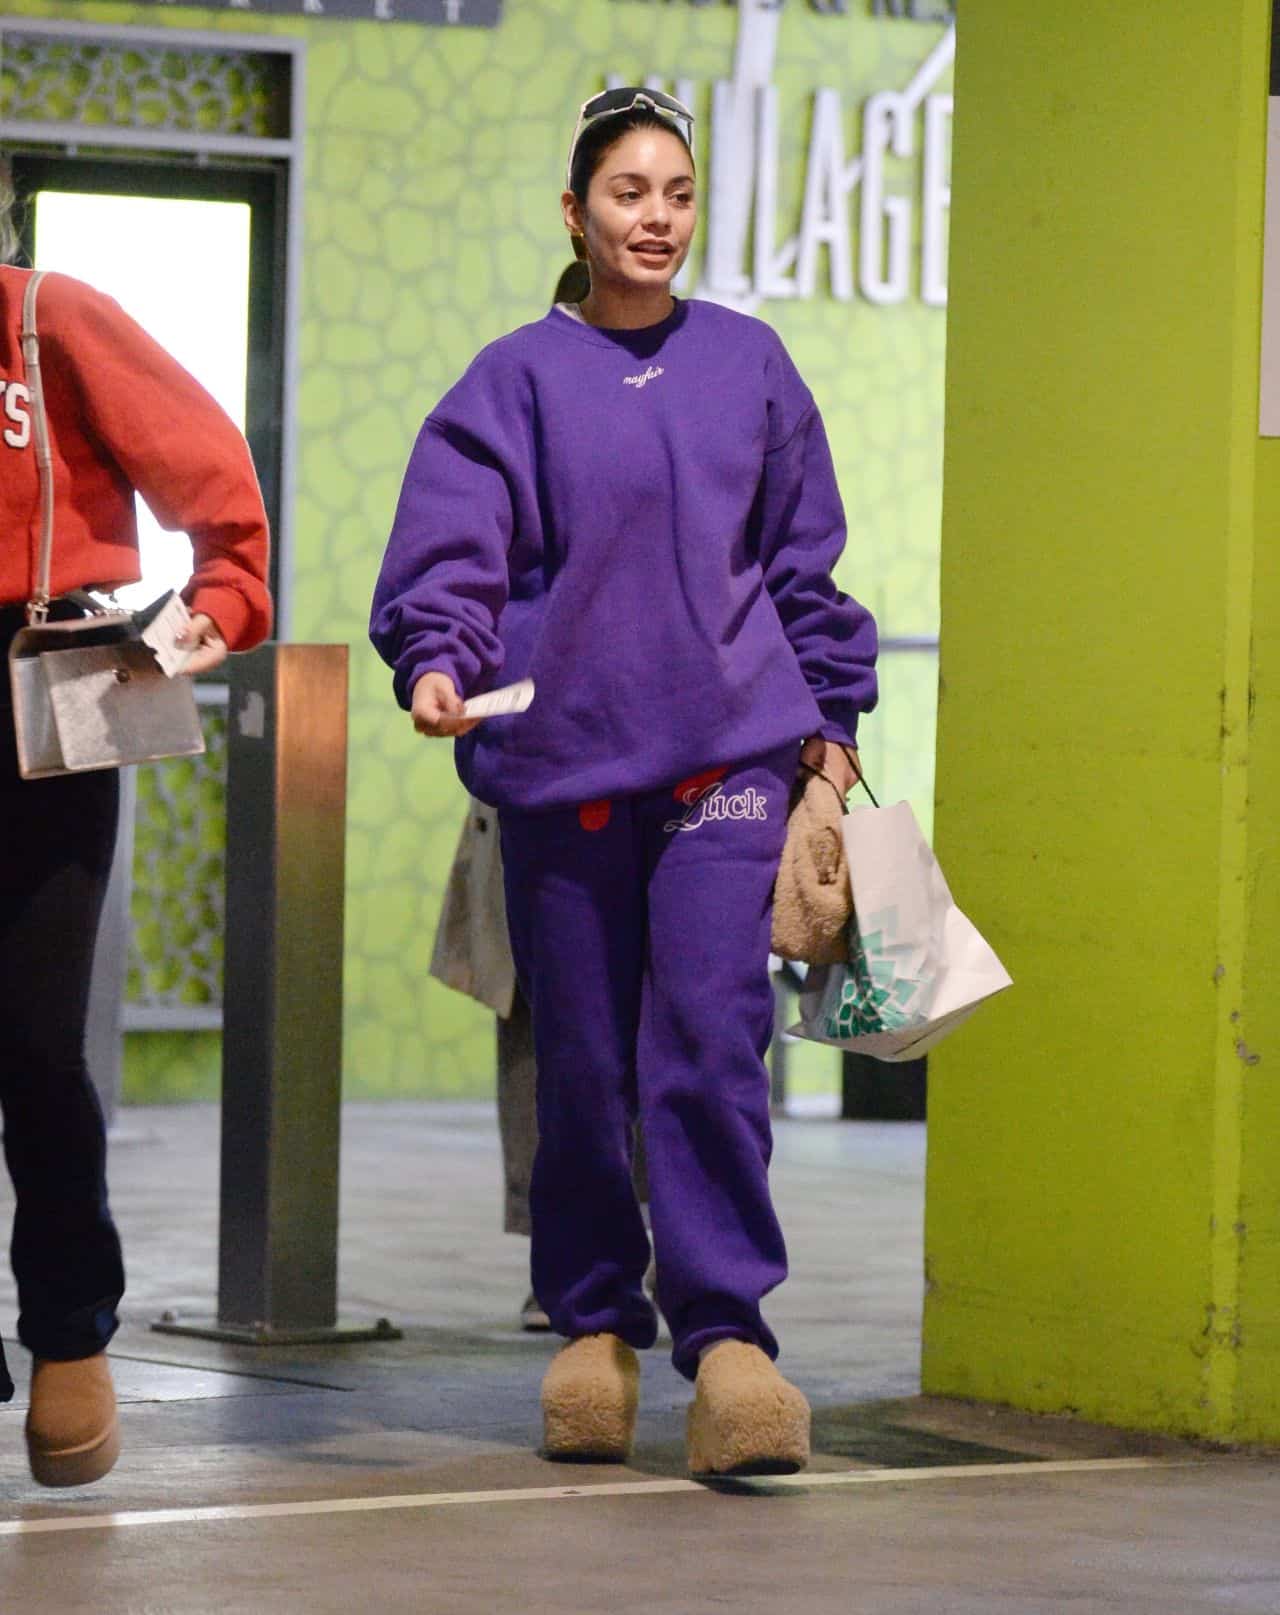 Vanessa Hudgens Rocks the Simon Miller Clogs in All-Purple Outfit